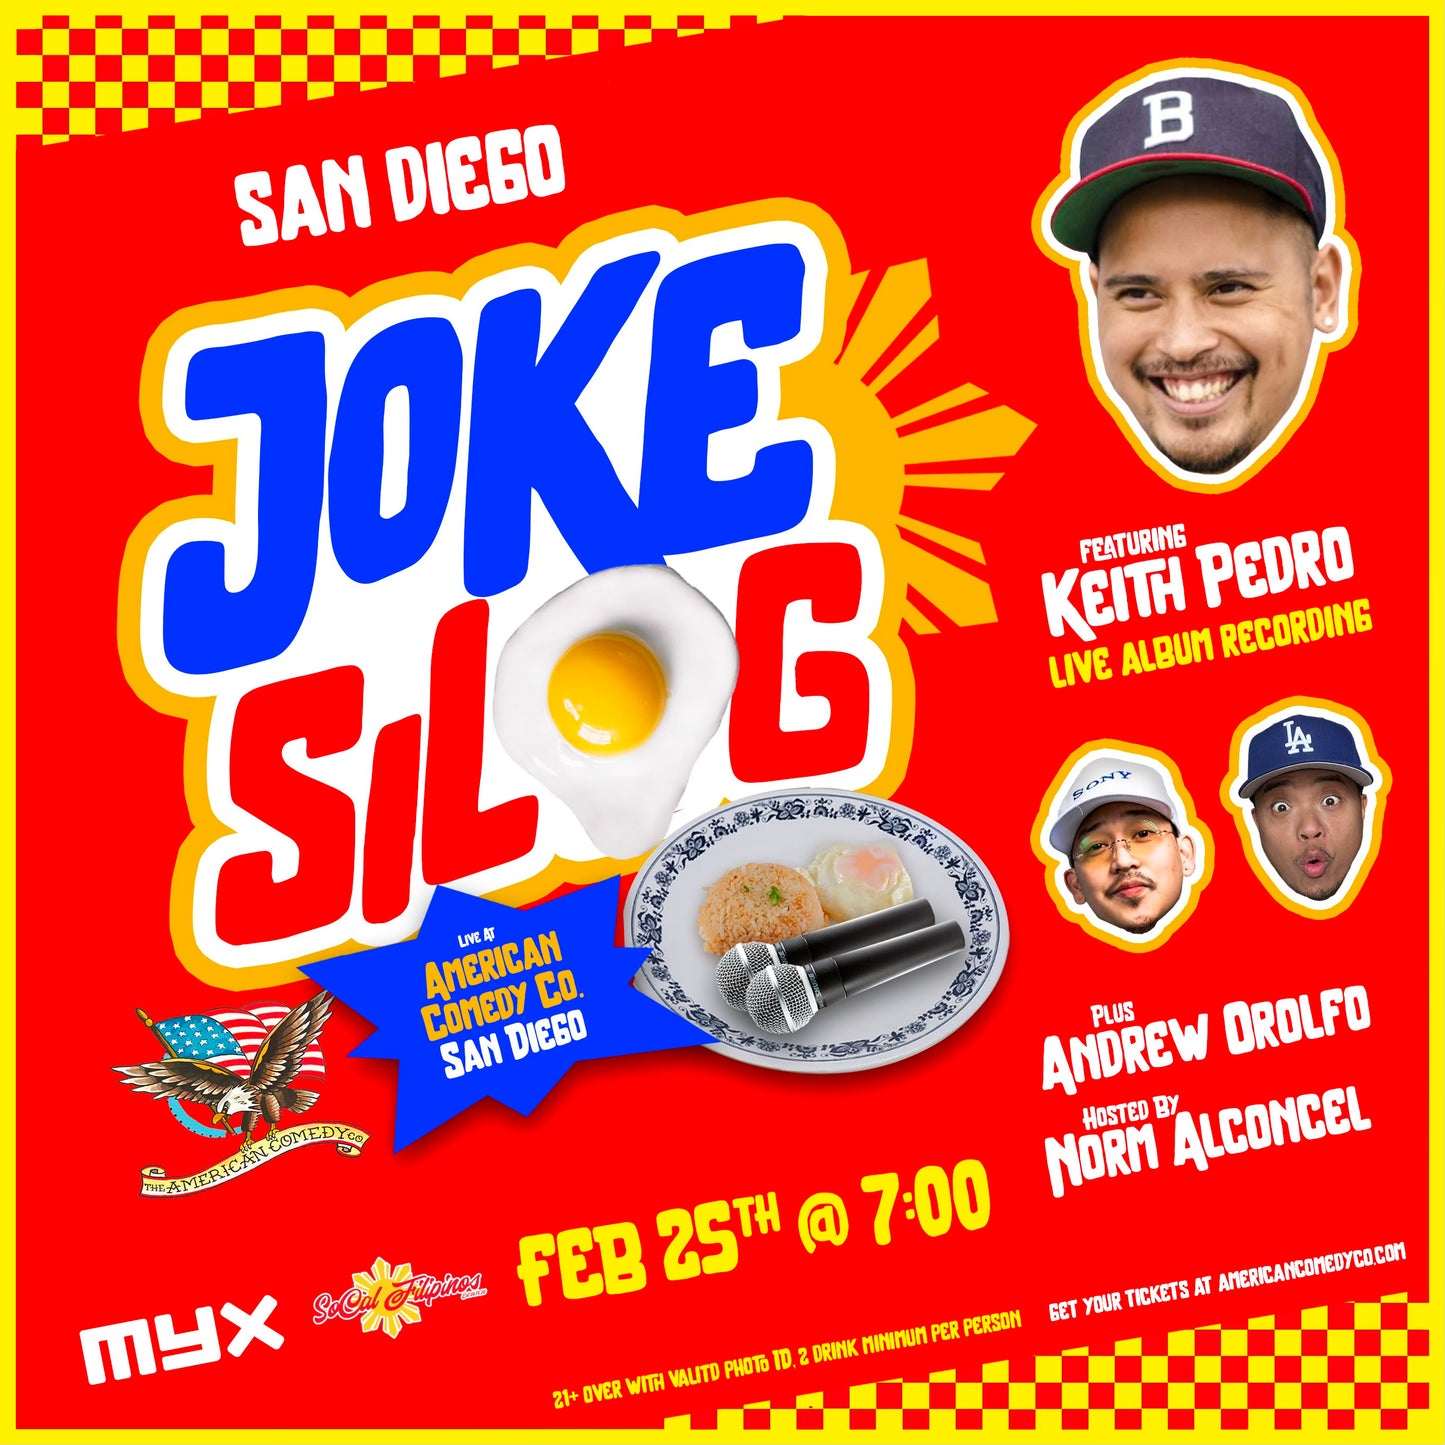 Joke Silog at American Comedy Co. San Diego, February 25 at 7pm